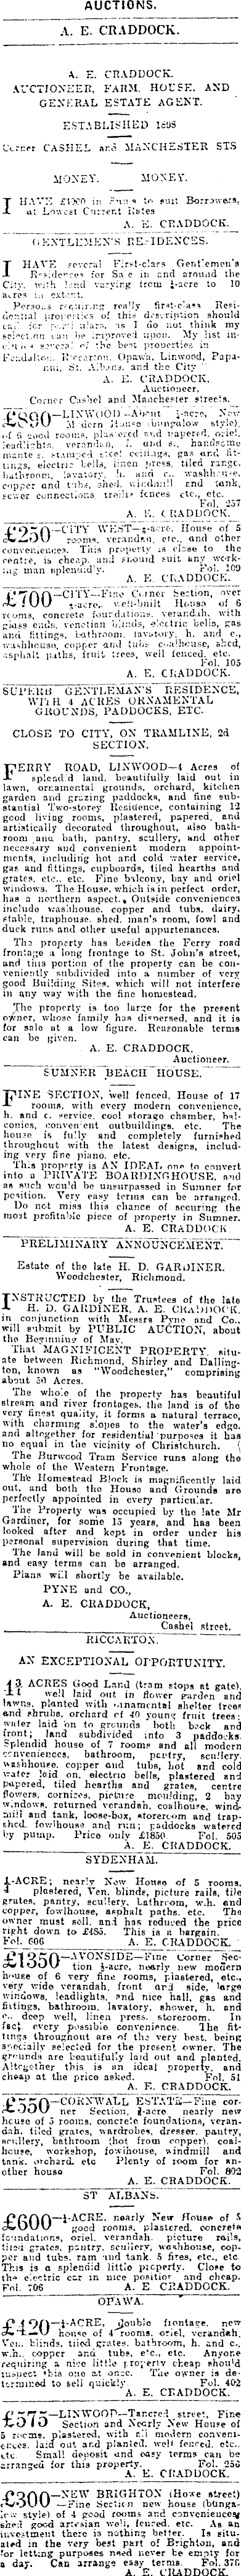 Papers Past Newspapers Press 24 April 1909 Page 15 Advertisements Column 4